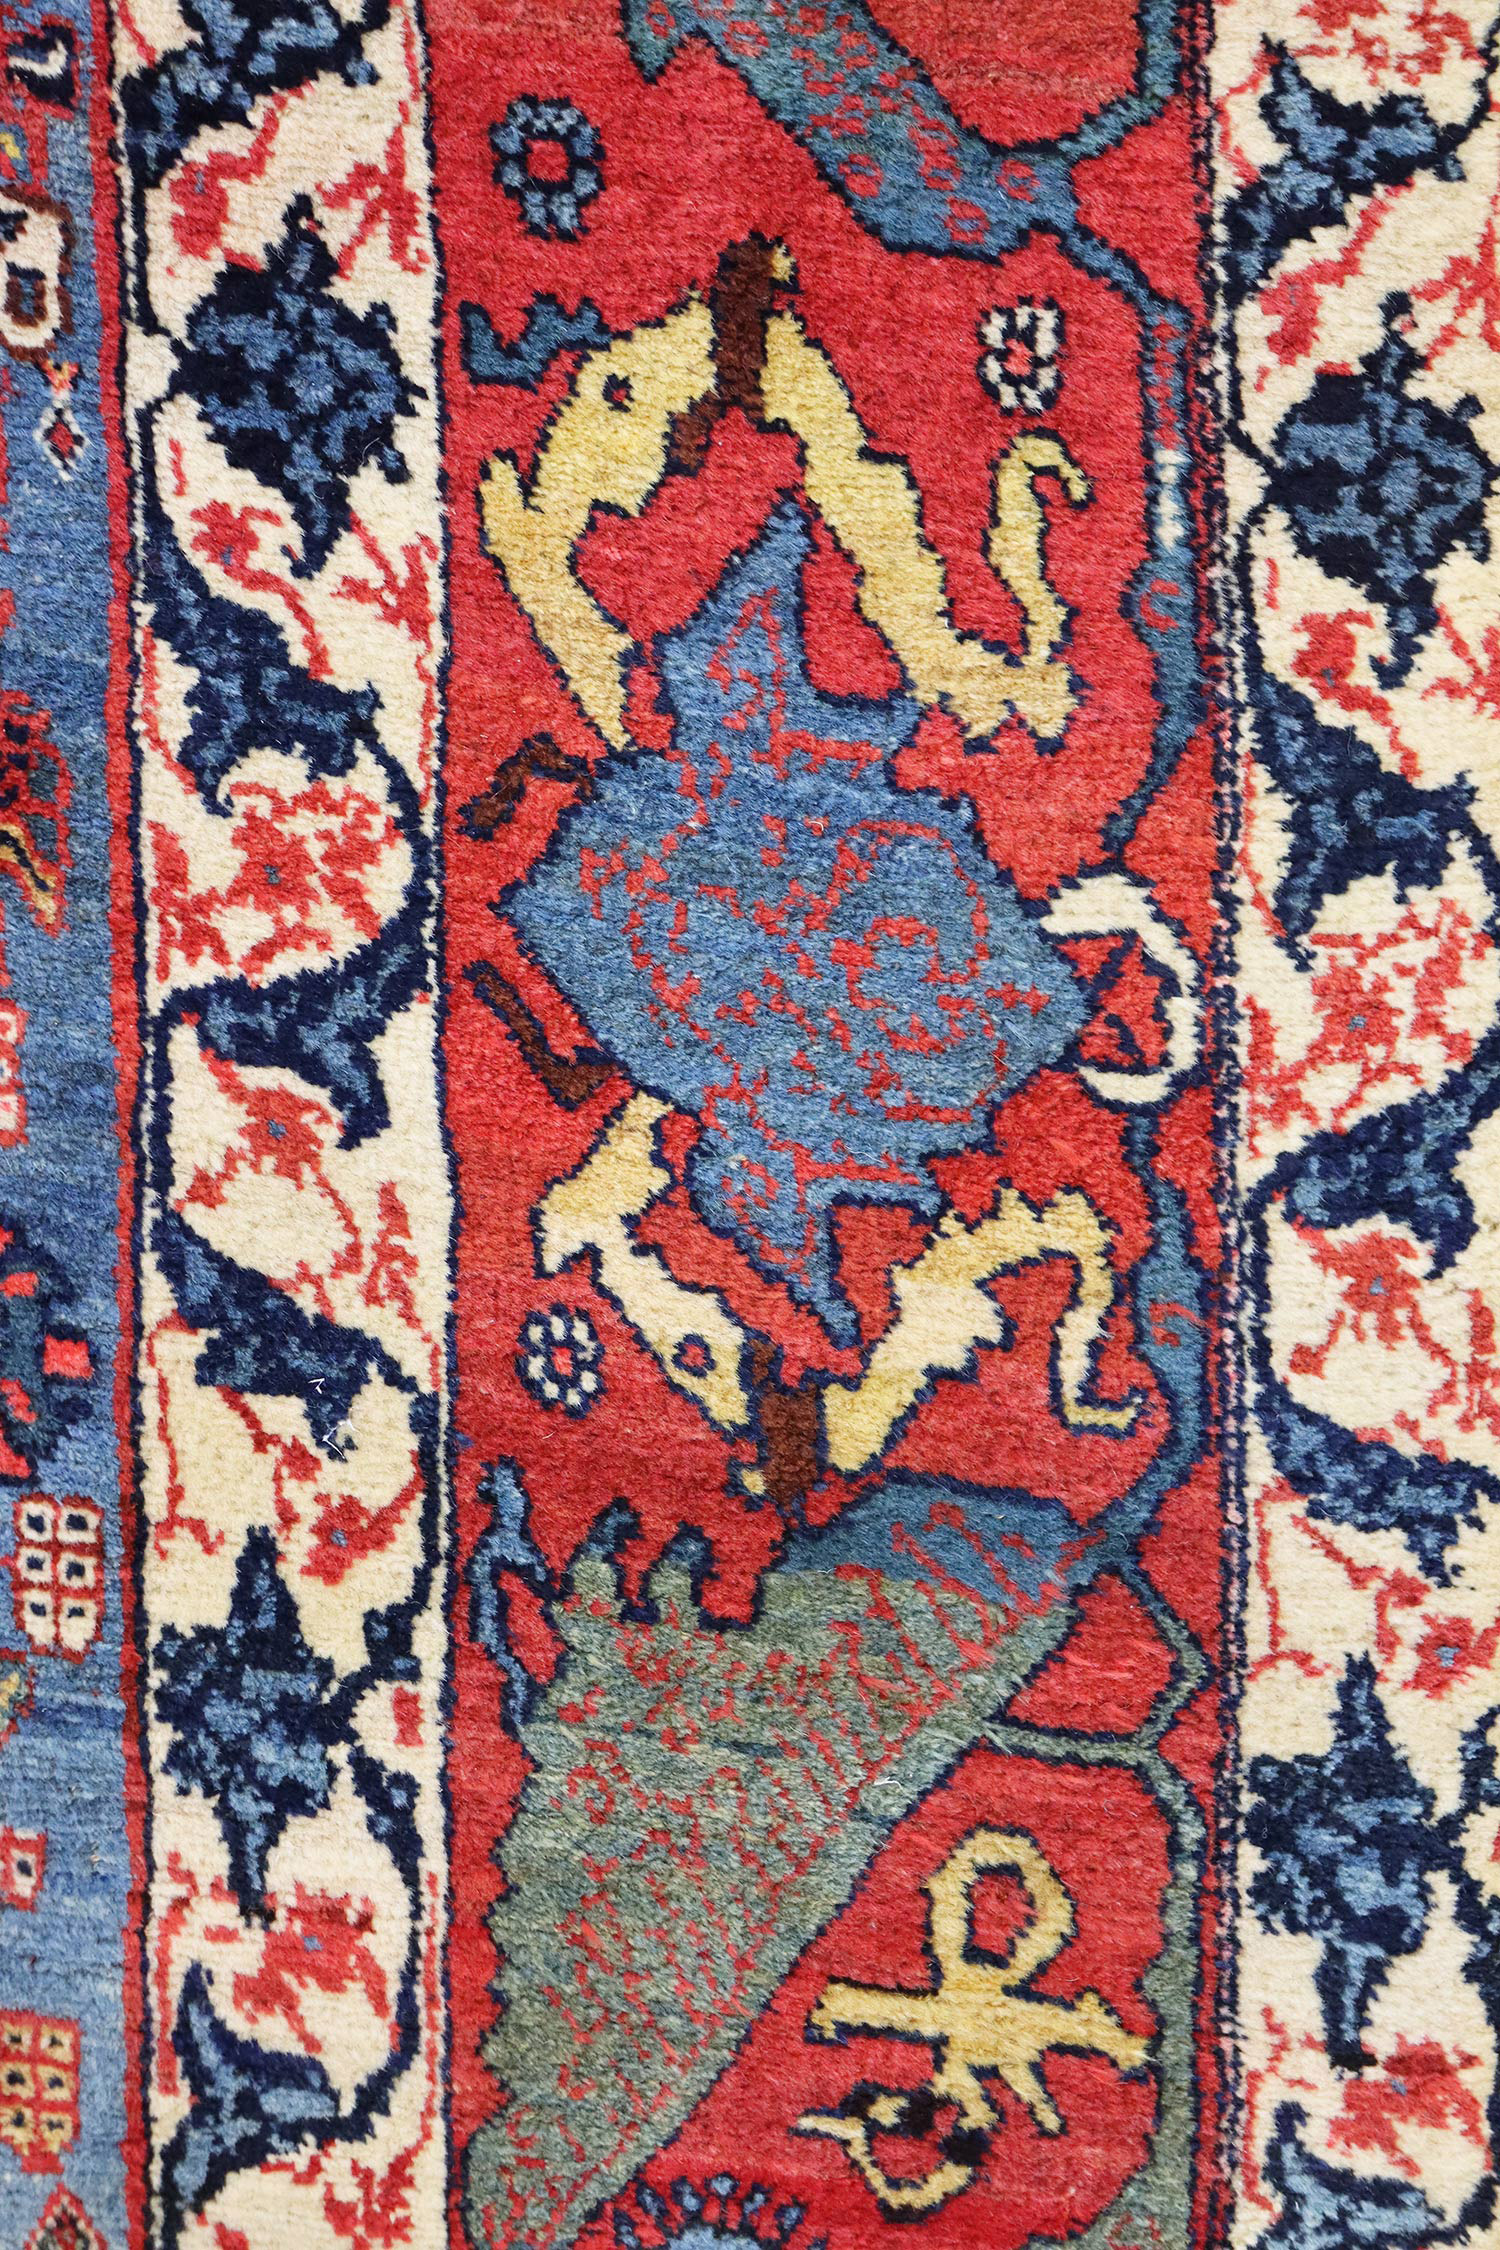 Border detail from an antique Persian Bidjar carpet in the "Gerus" style, circa 1890. The field features an uncommon design of small, stylized flowers on a mid blue field. Douglas stock Gallery, antique rugs Wellesley / Natick,MA area